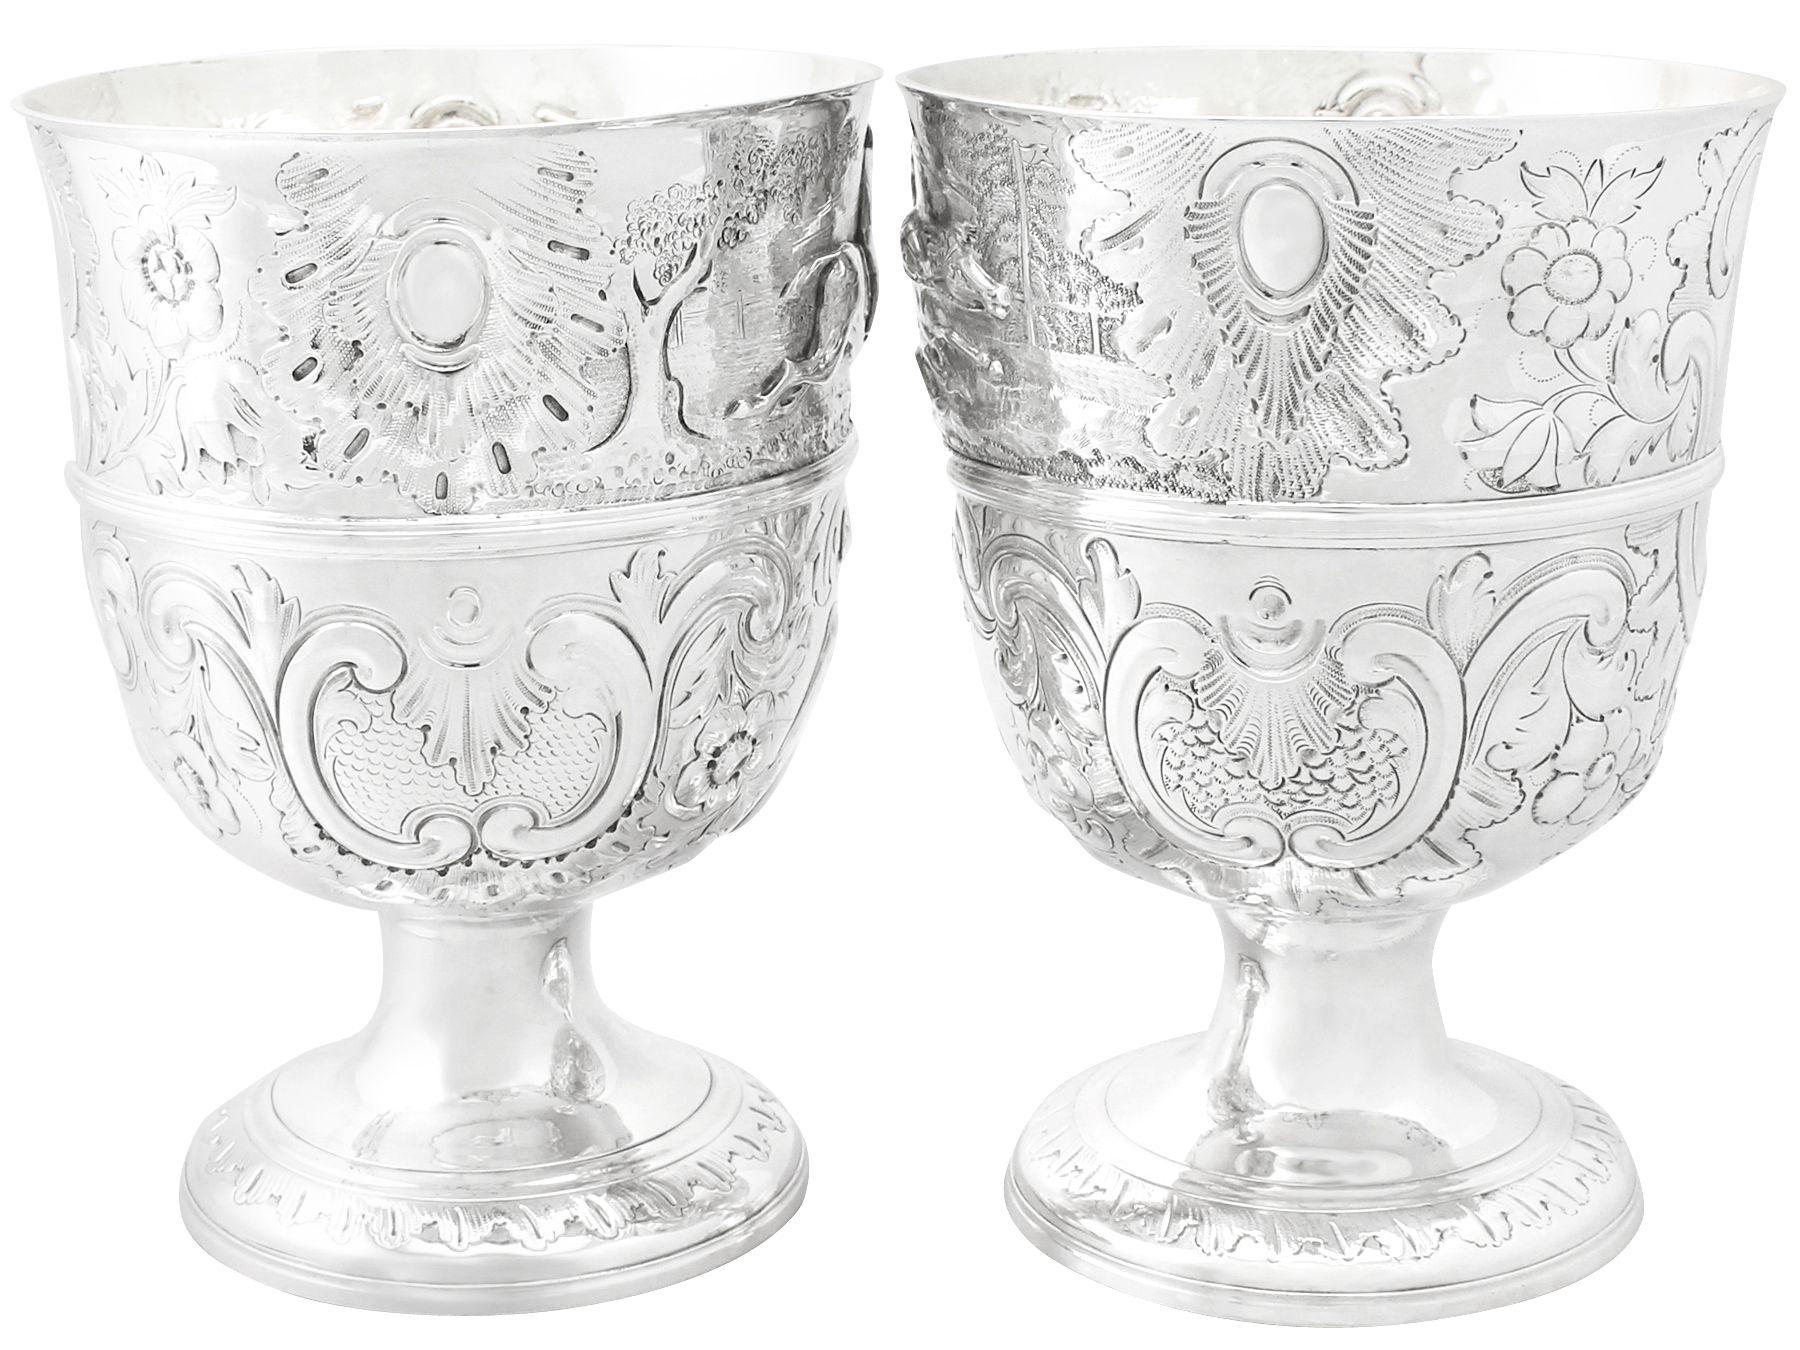 An exceptional, fine and impressive composite pair of antique English sterling silver presentation cups; an addition to our ornamental silverware collection.

These exceptional antique sterling silver presentation cups have a bell shaped form onto